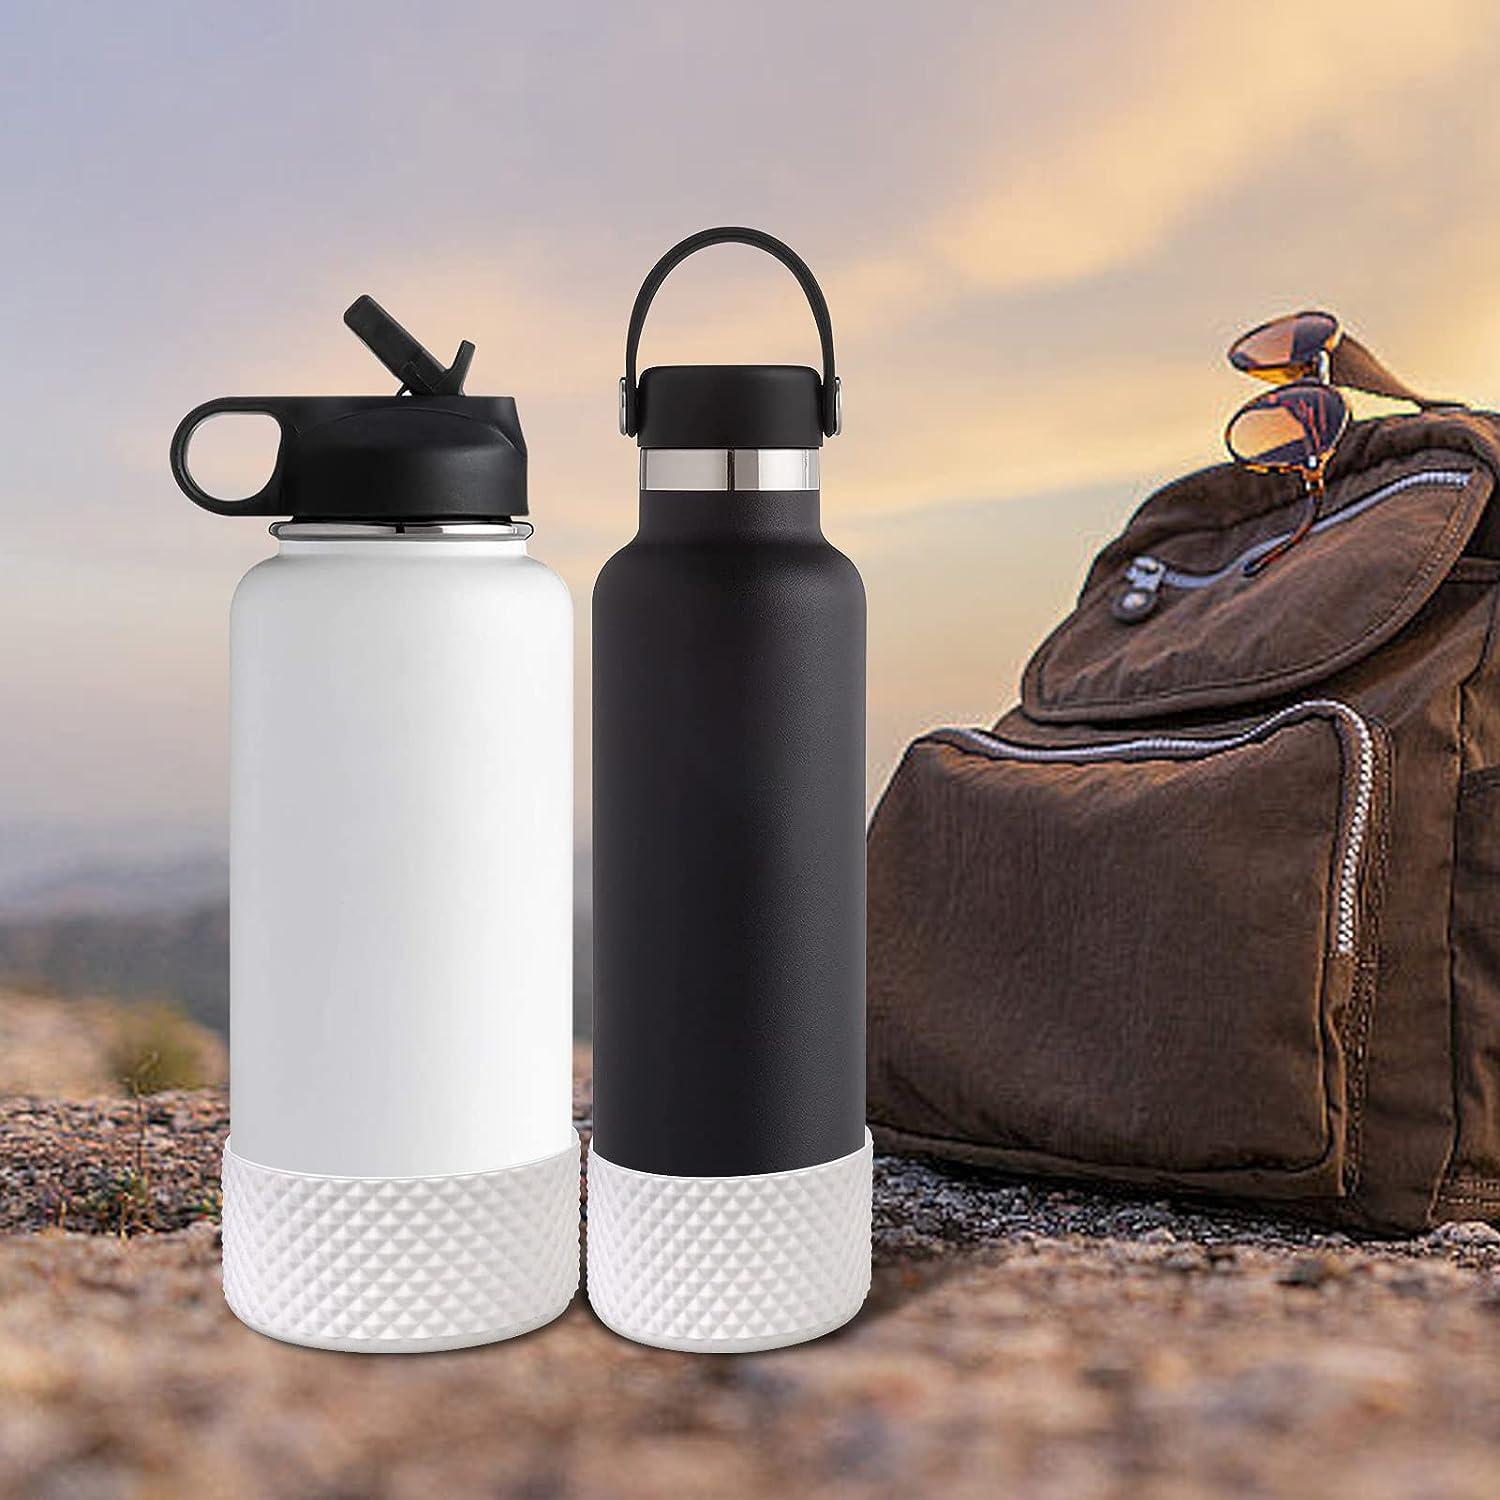 Water Bottle Boot,Diamond Texture Silicone Boot Protector 12oz-40oz Hydro  Sport Flask and More Water Bottles Anti-Slip Flex Boot Bottom Sleeve Cover  Fits 12oz to 24 oz Bottles White (Diamond)